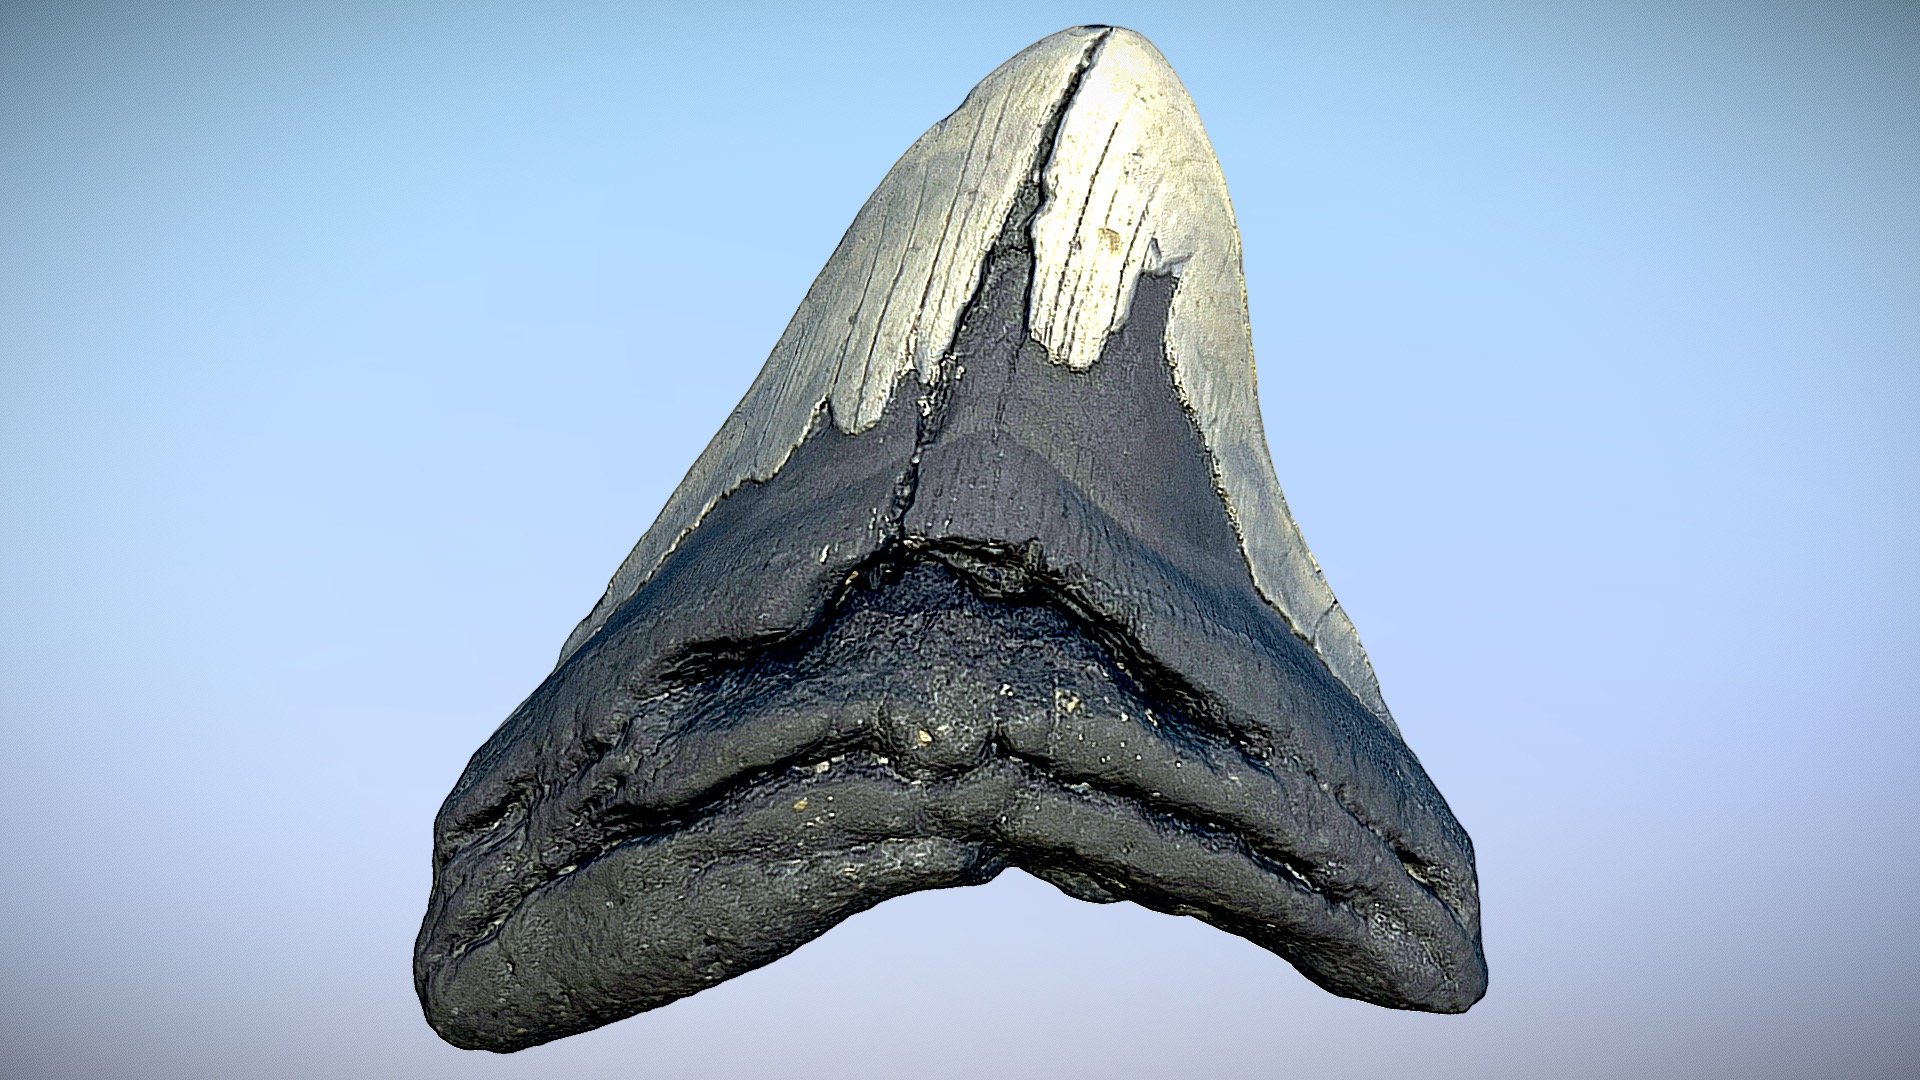 A photoscanned  Megalodon Fossil Shark Tooth.
Approximtely 5.67